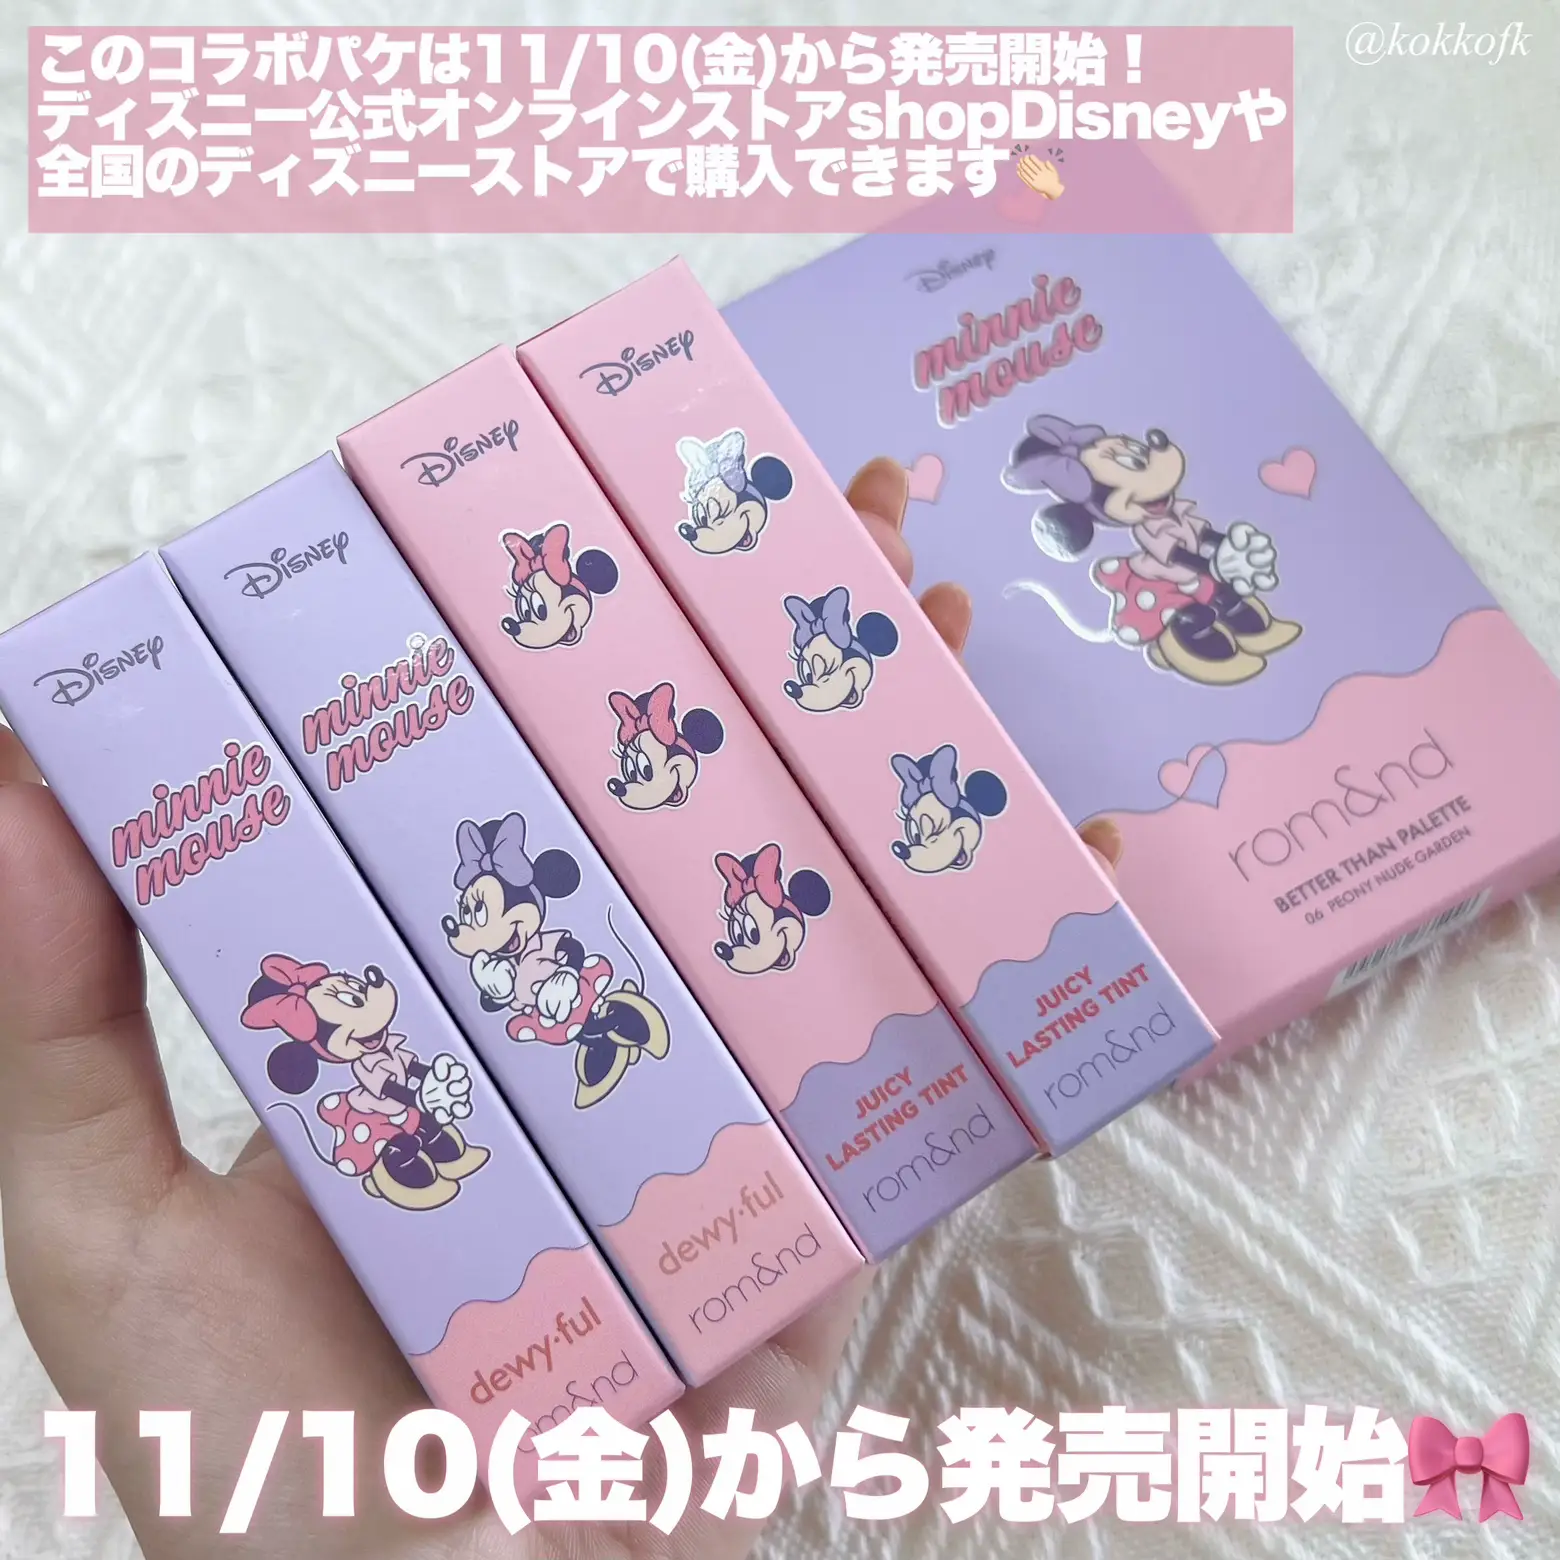 Rom and Minnie-chan Pake Cosmetics 🎀 / | Gallery posted by 琴音